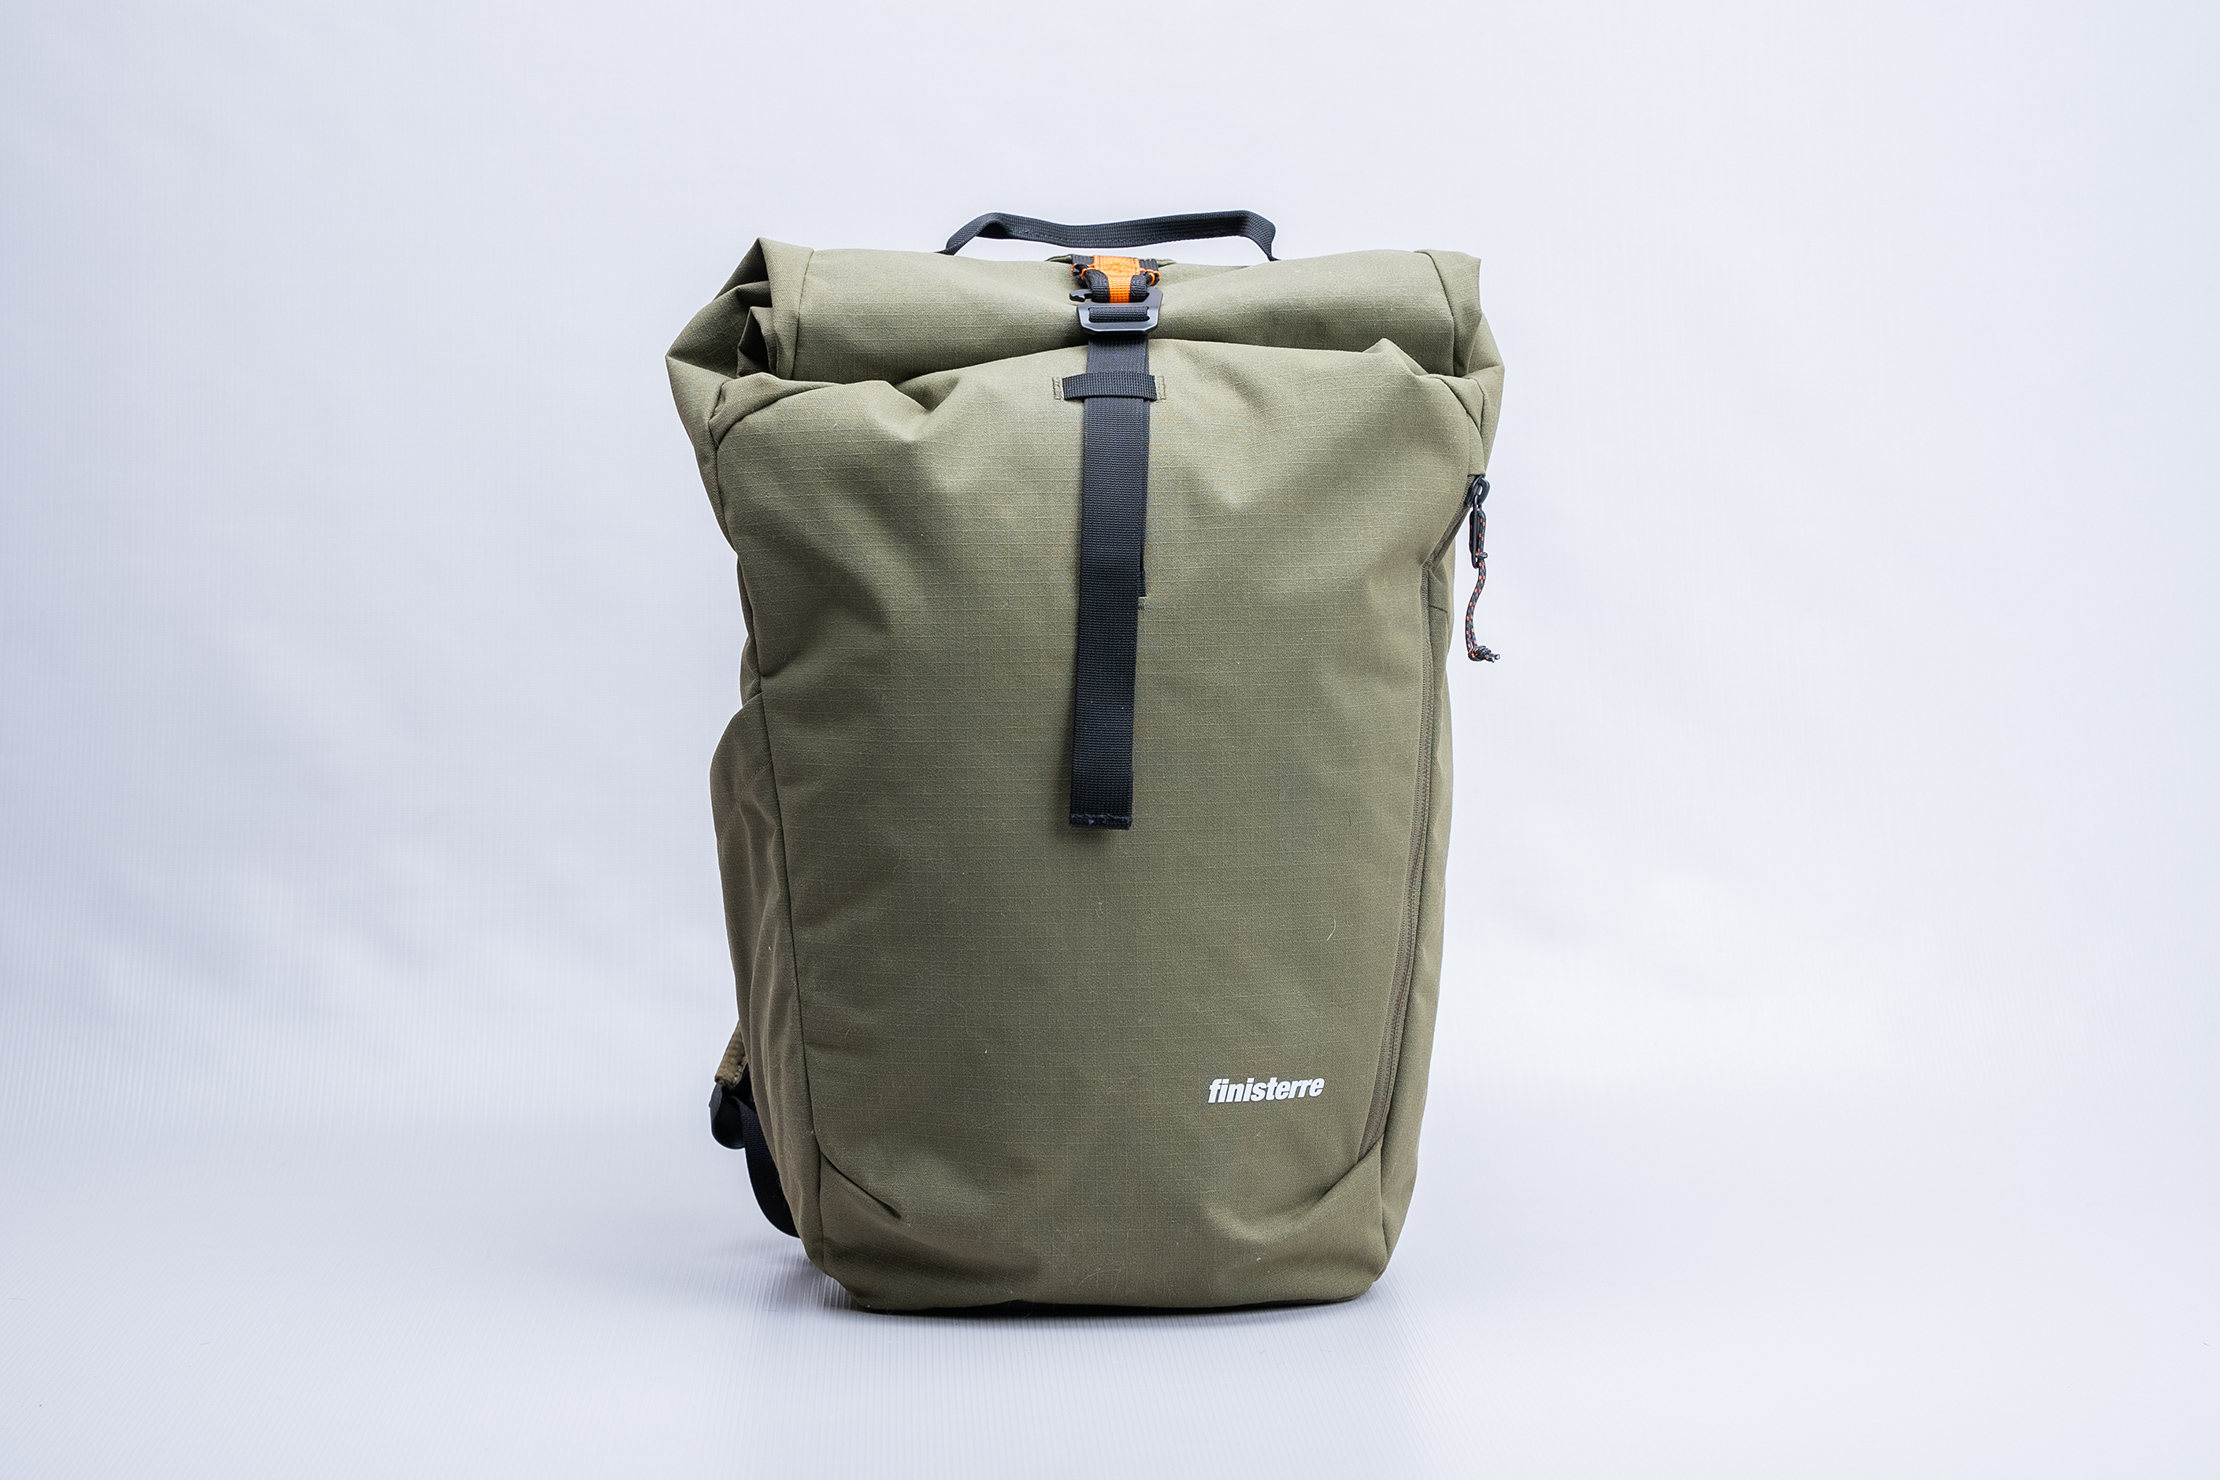 Finisterre Nautilus 23L Backpack Full